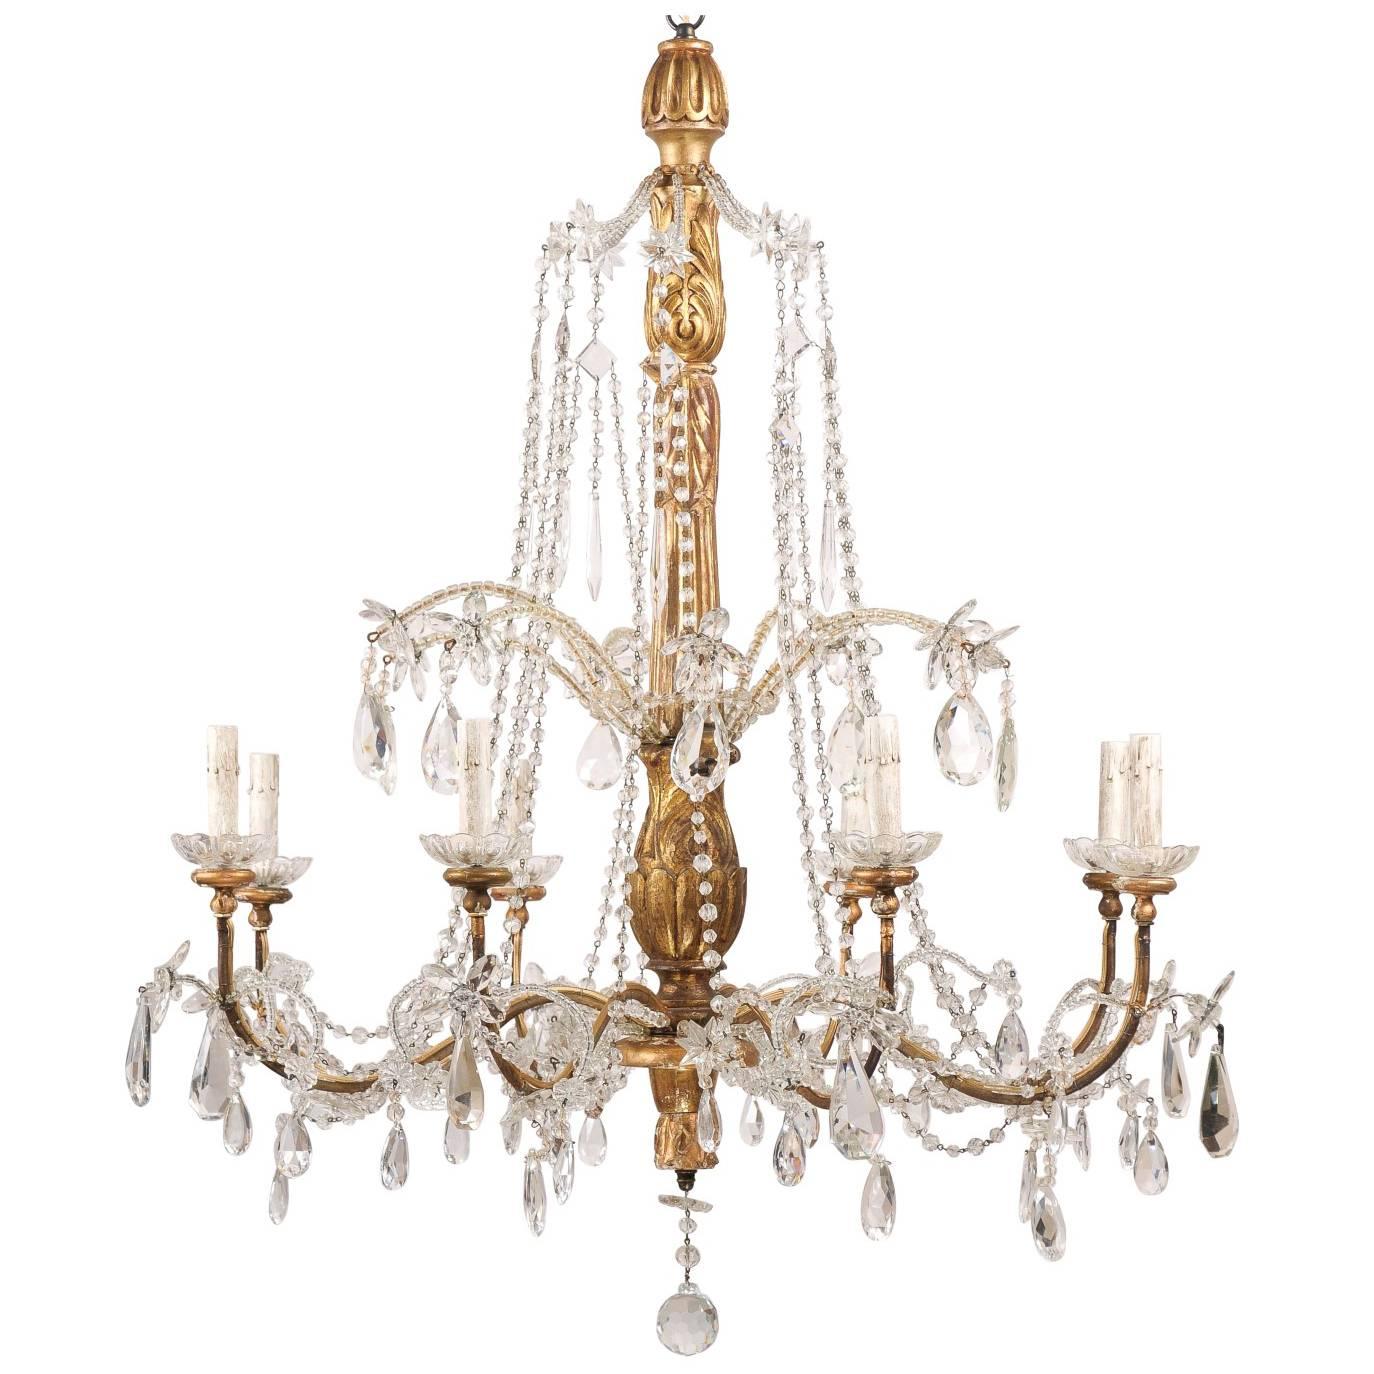 Italian Crystal and Giltwood Chandelier from the 19th Century - Gold Color